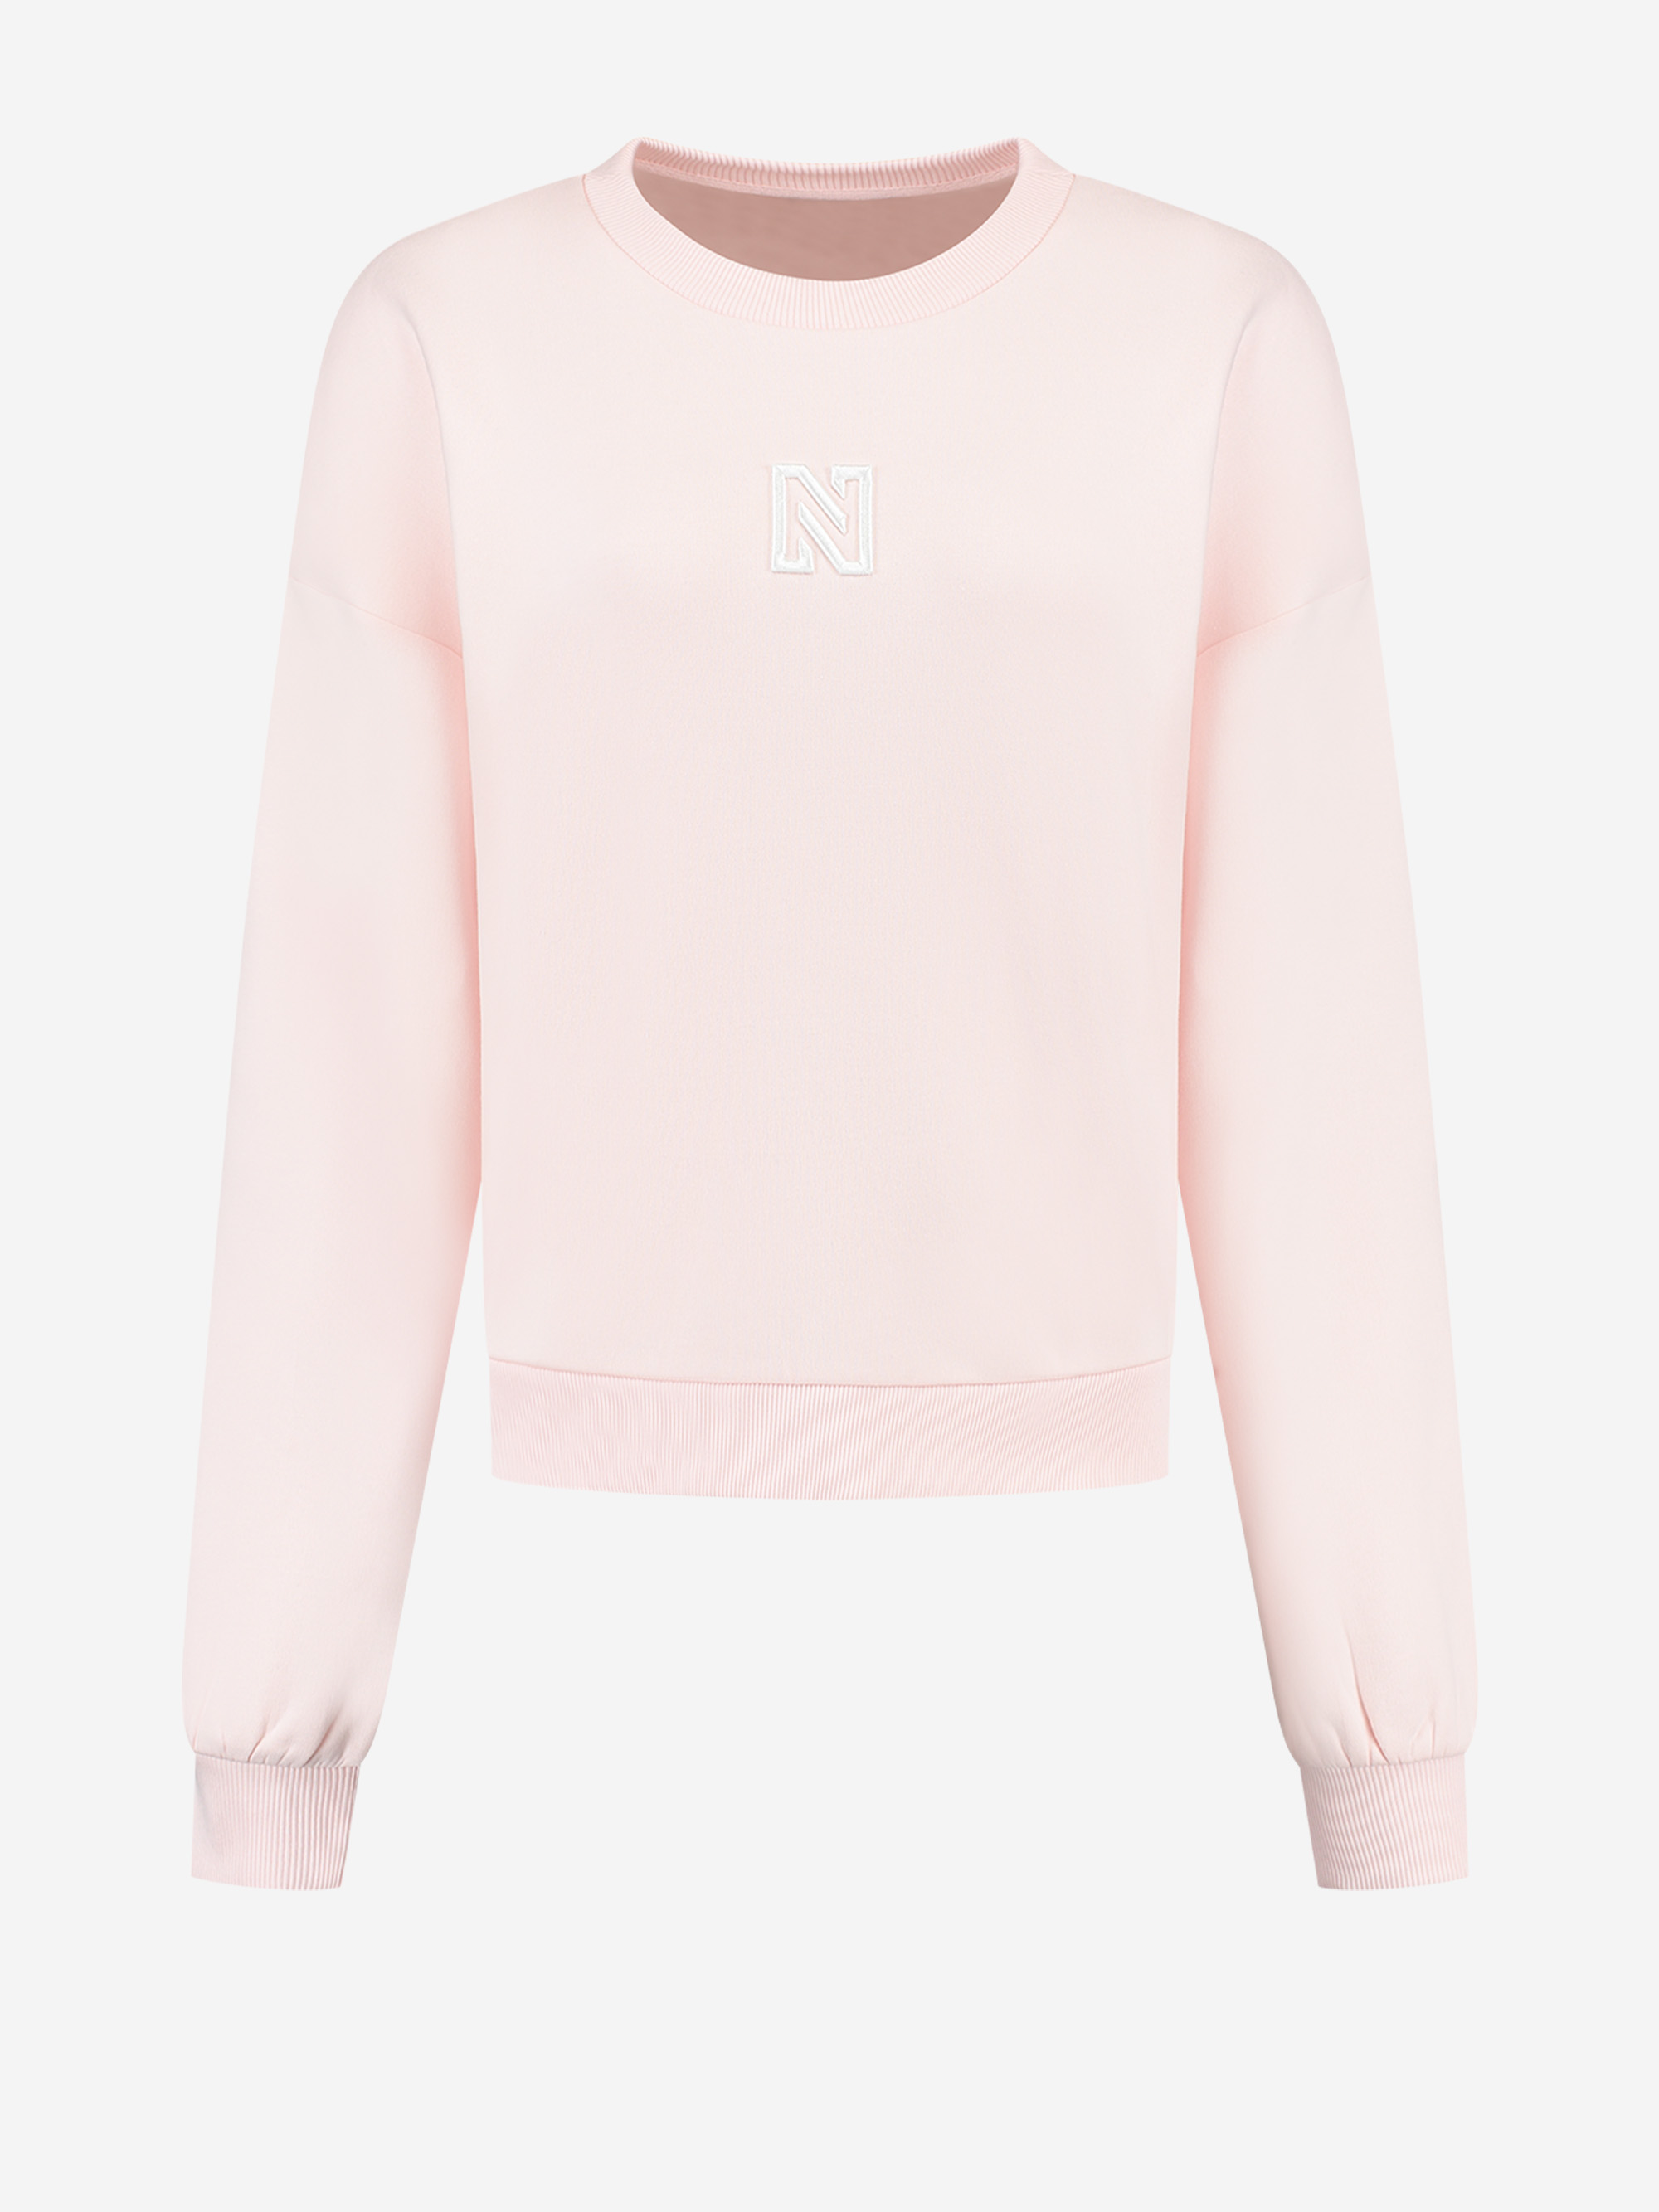 Sweater with N logo